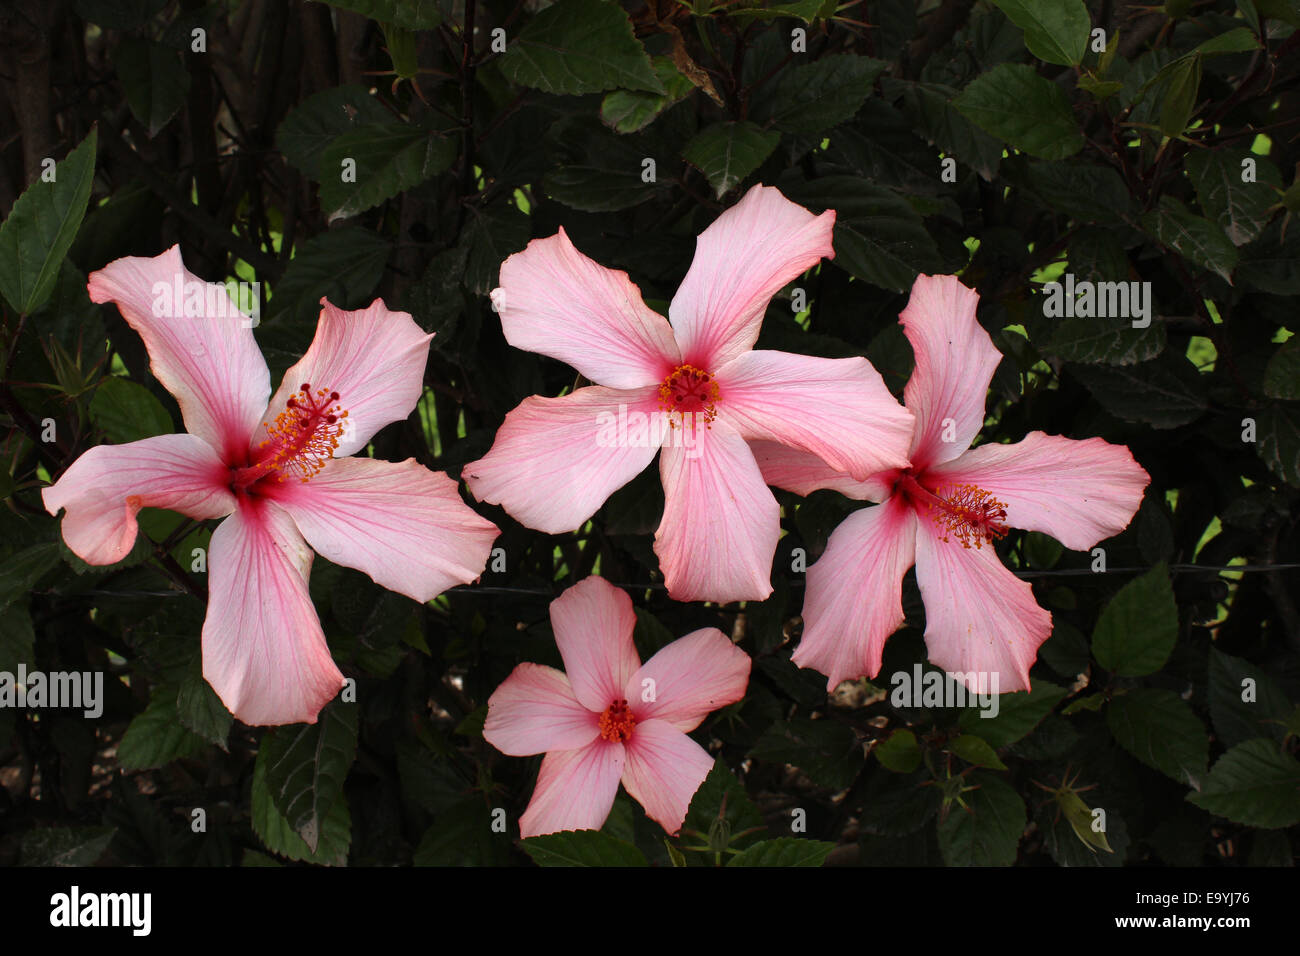 Hibiscus flowers growing on a tree in Cotacachi, Ecuador Stock Photo